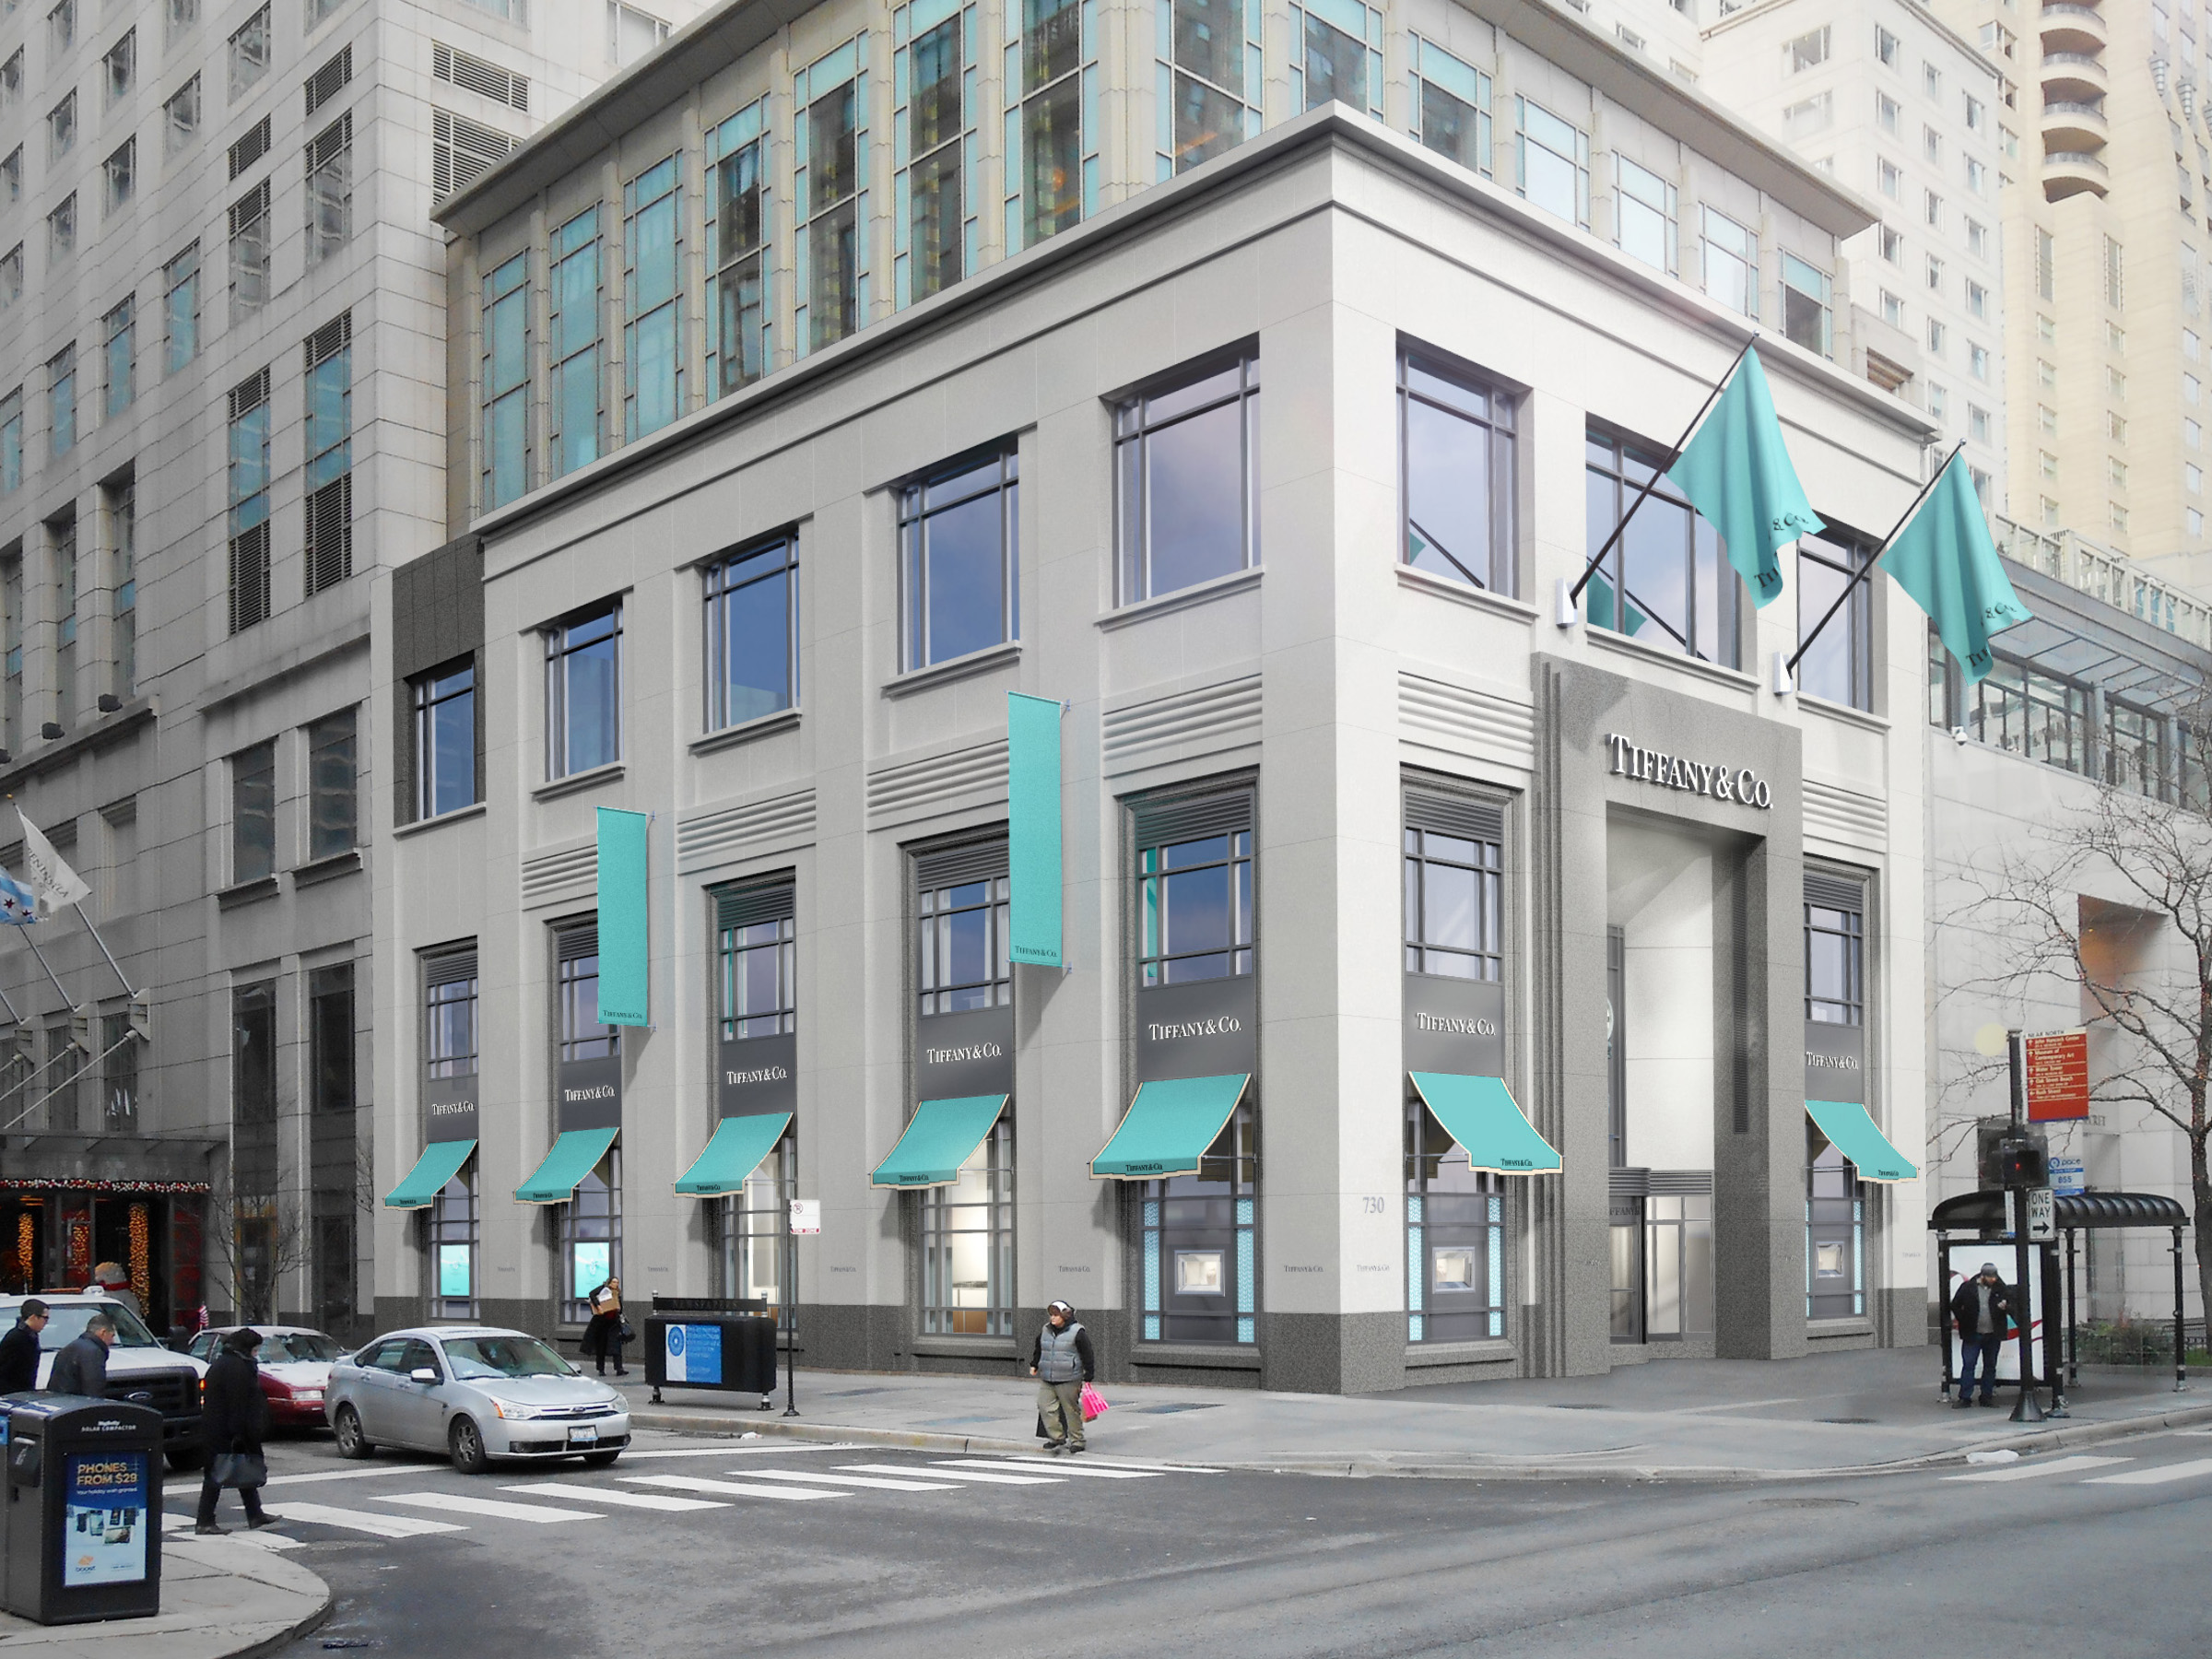 Tiffany & Co.'s Fifth Avenue Store Reopening Set – Visual Merchandising and  Store Design